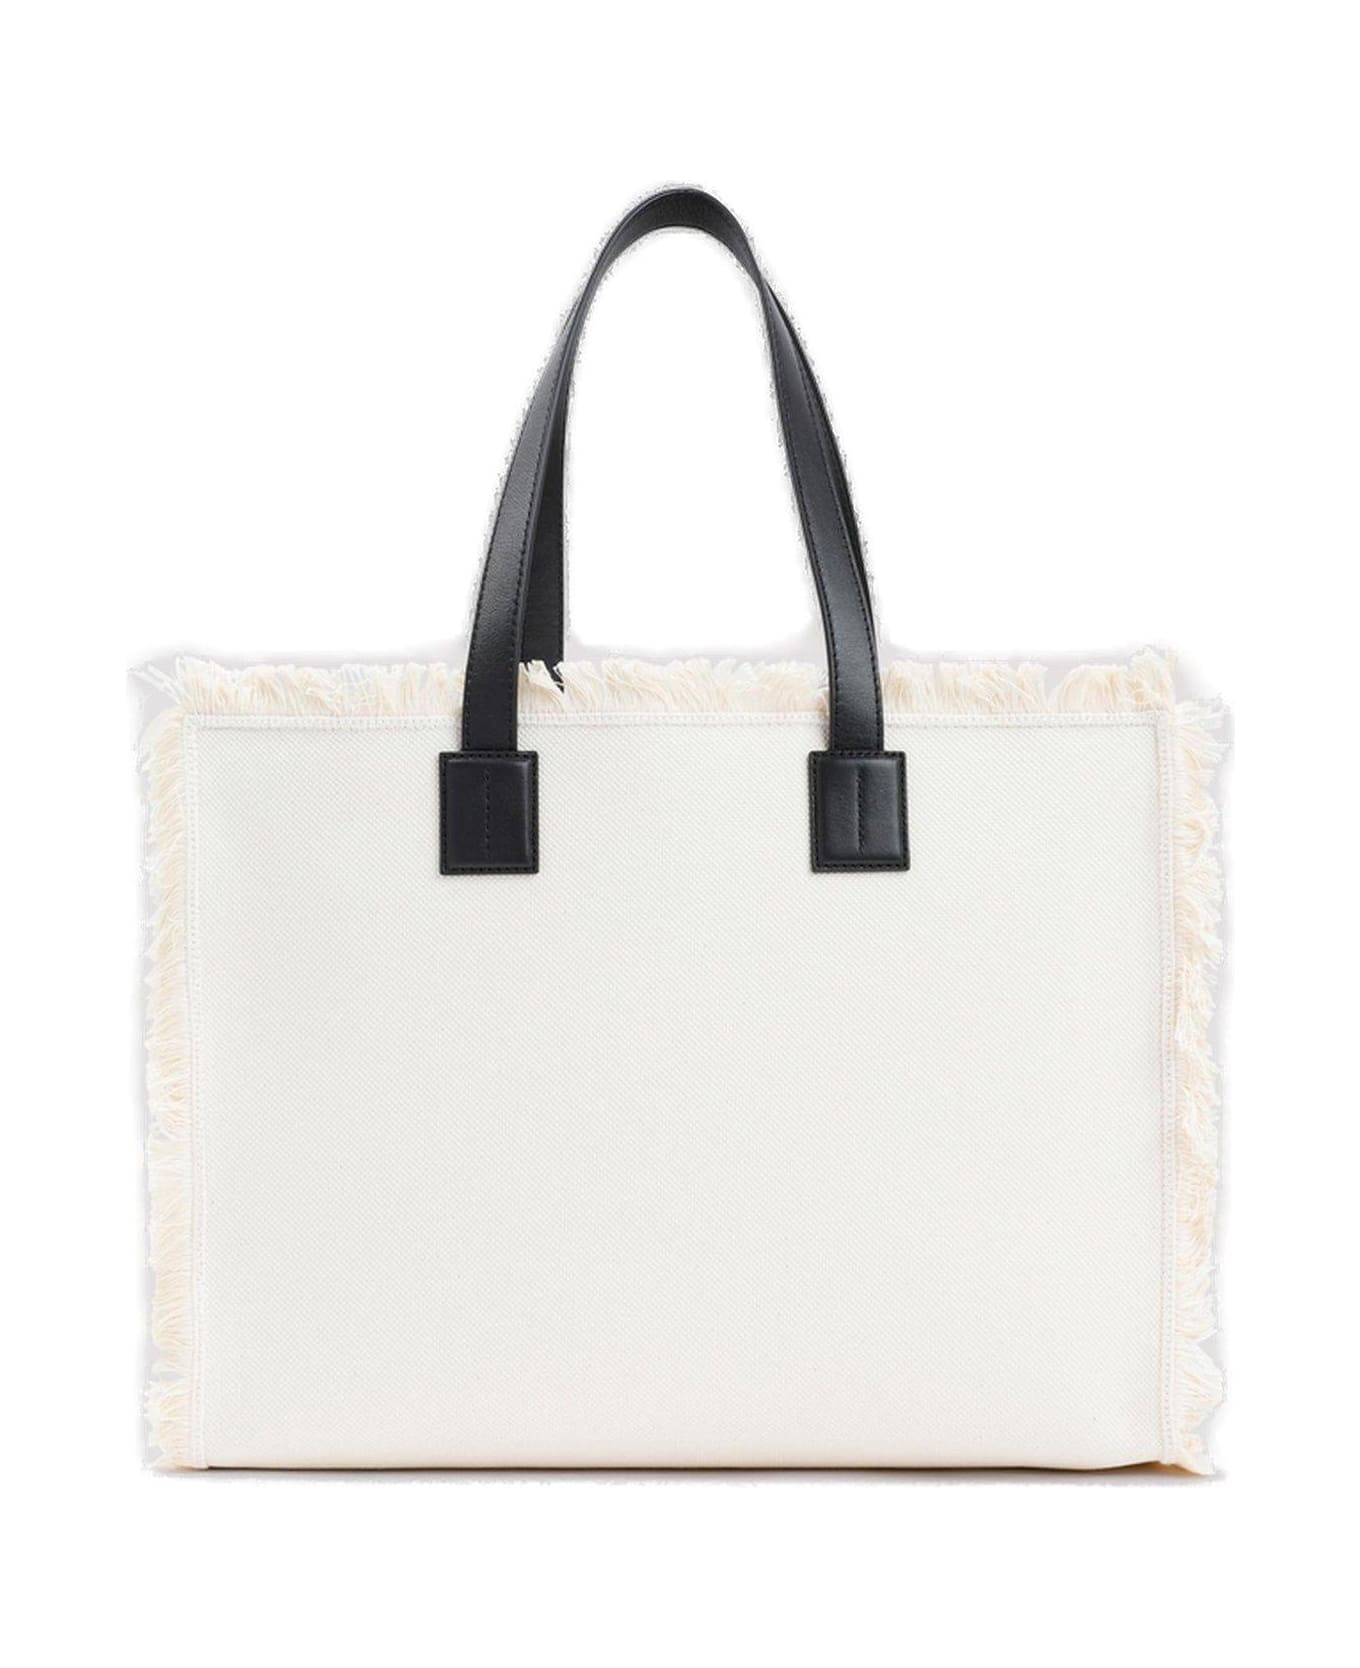 Bally Logo Embroidered Fringed Tote Bag - Beige トートバッグ